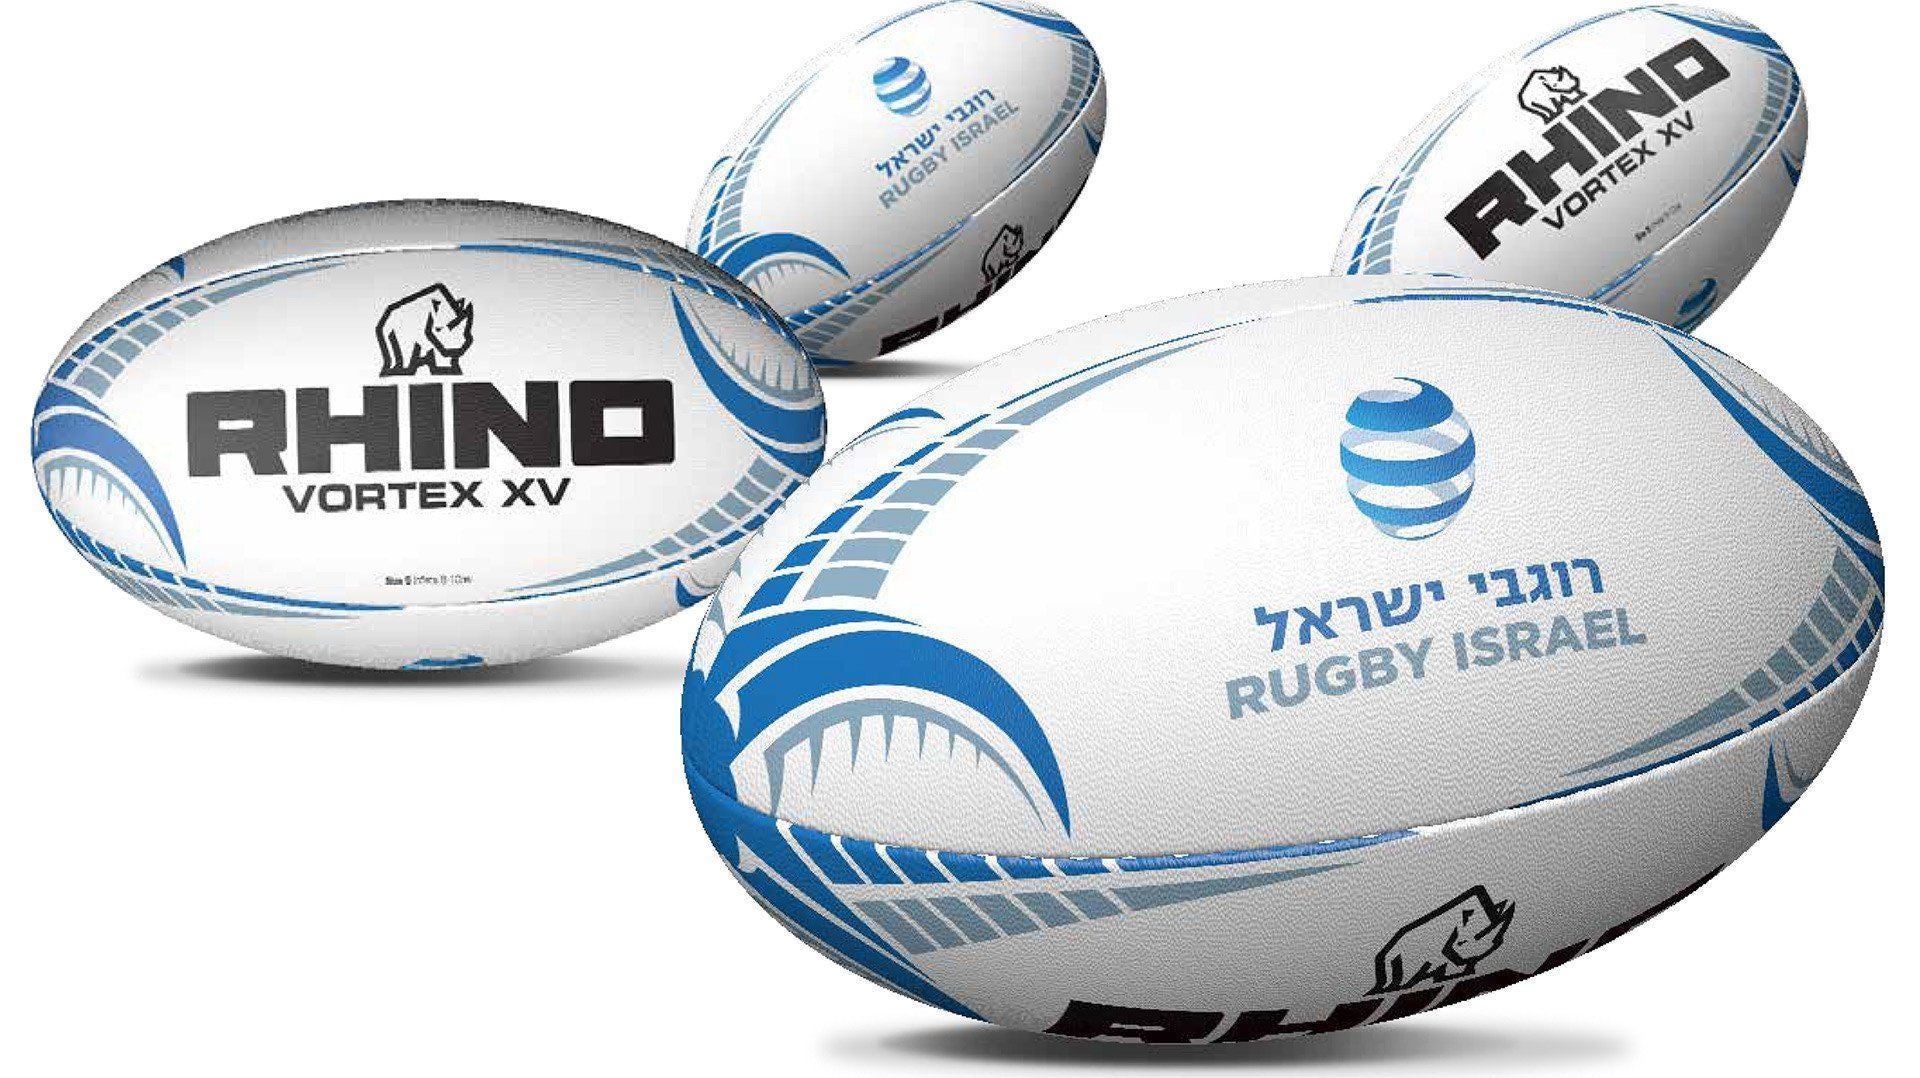 Rugby Israel partners with Rhino